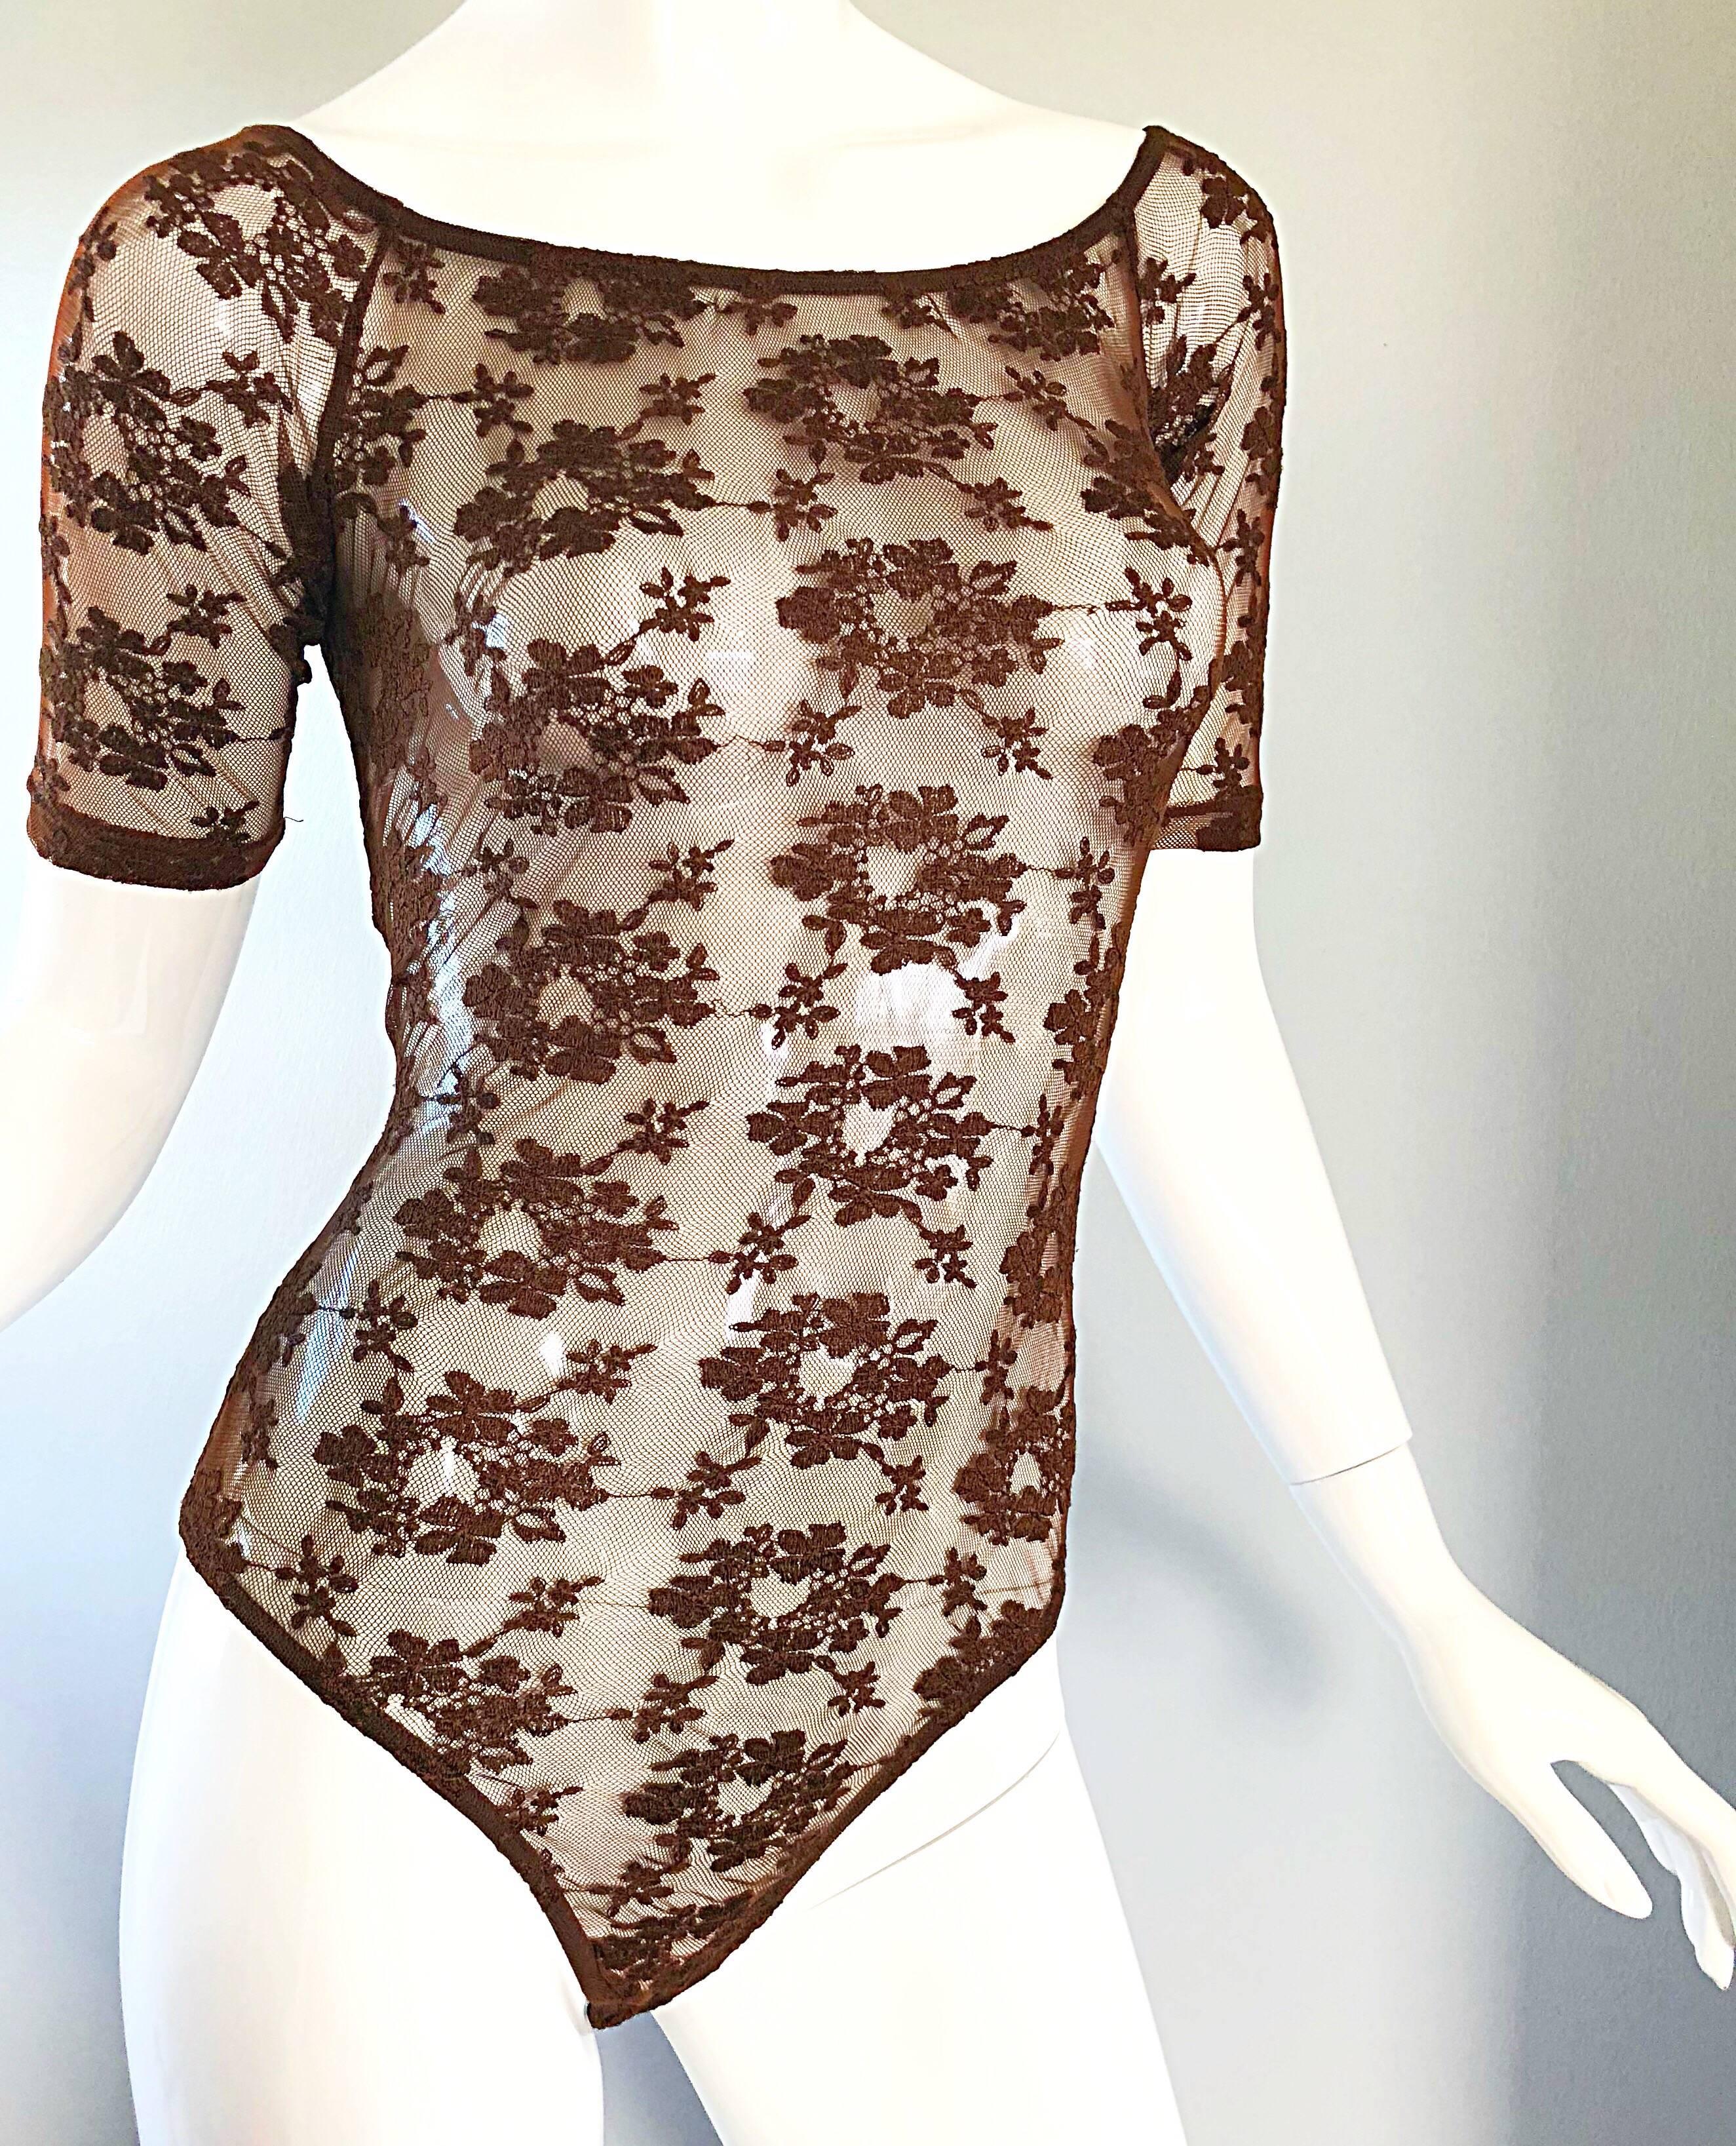 Rare Rifat Ozbek 1990s Choclate Brown French Lace 90s Vintage Bodysuit Top  In Excellent Condition For Sale In San Diego, CA